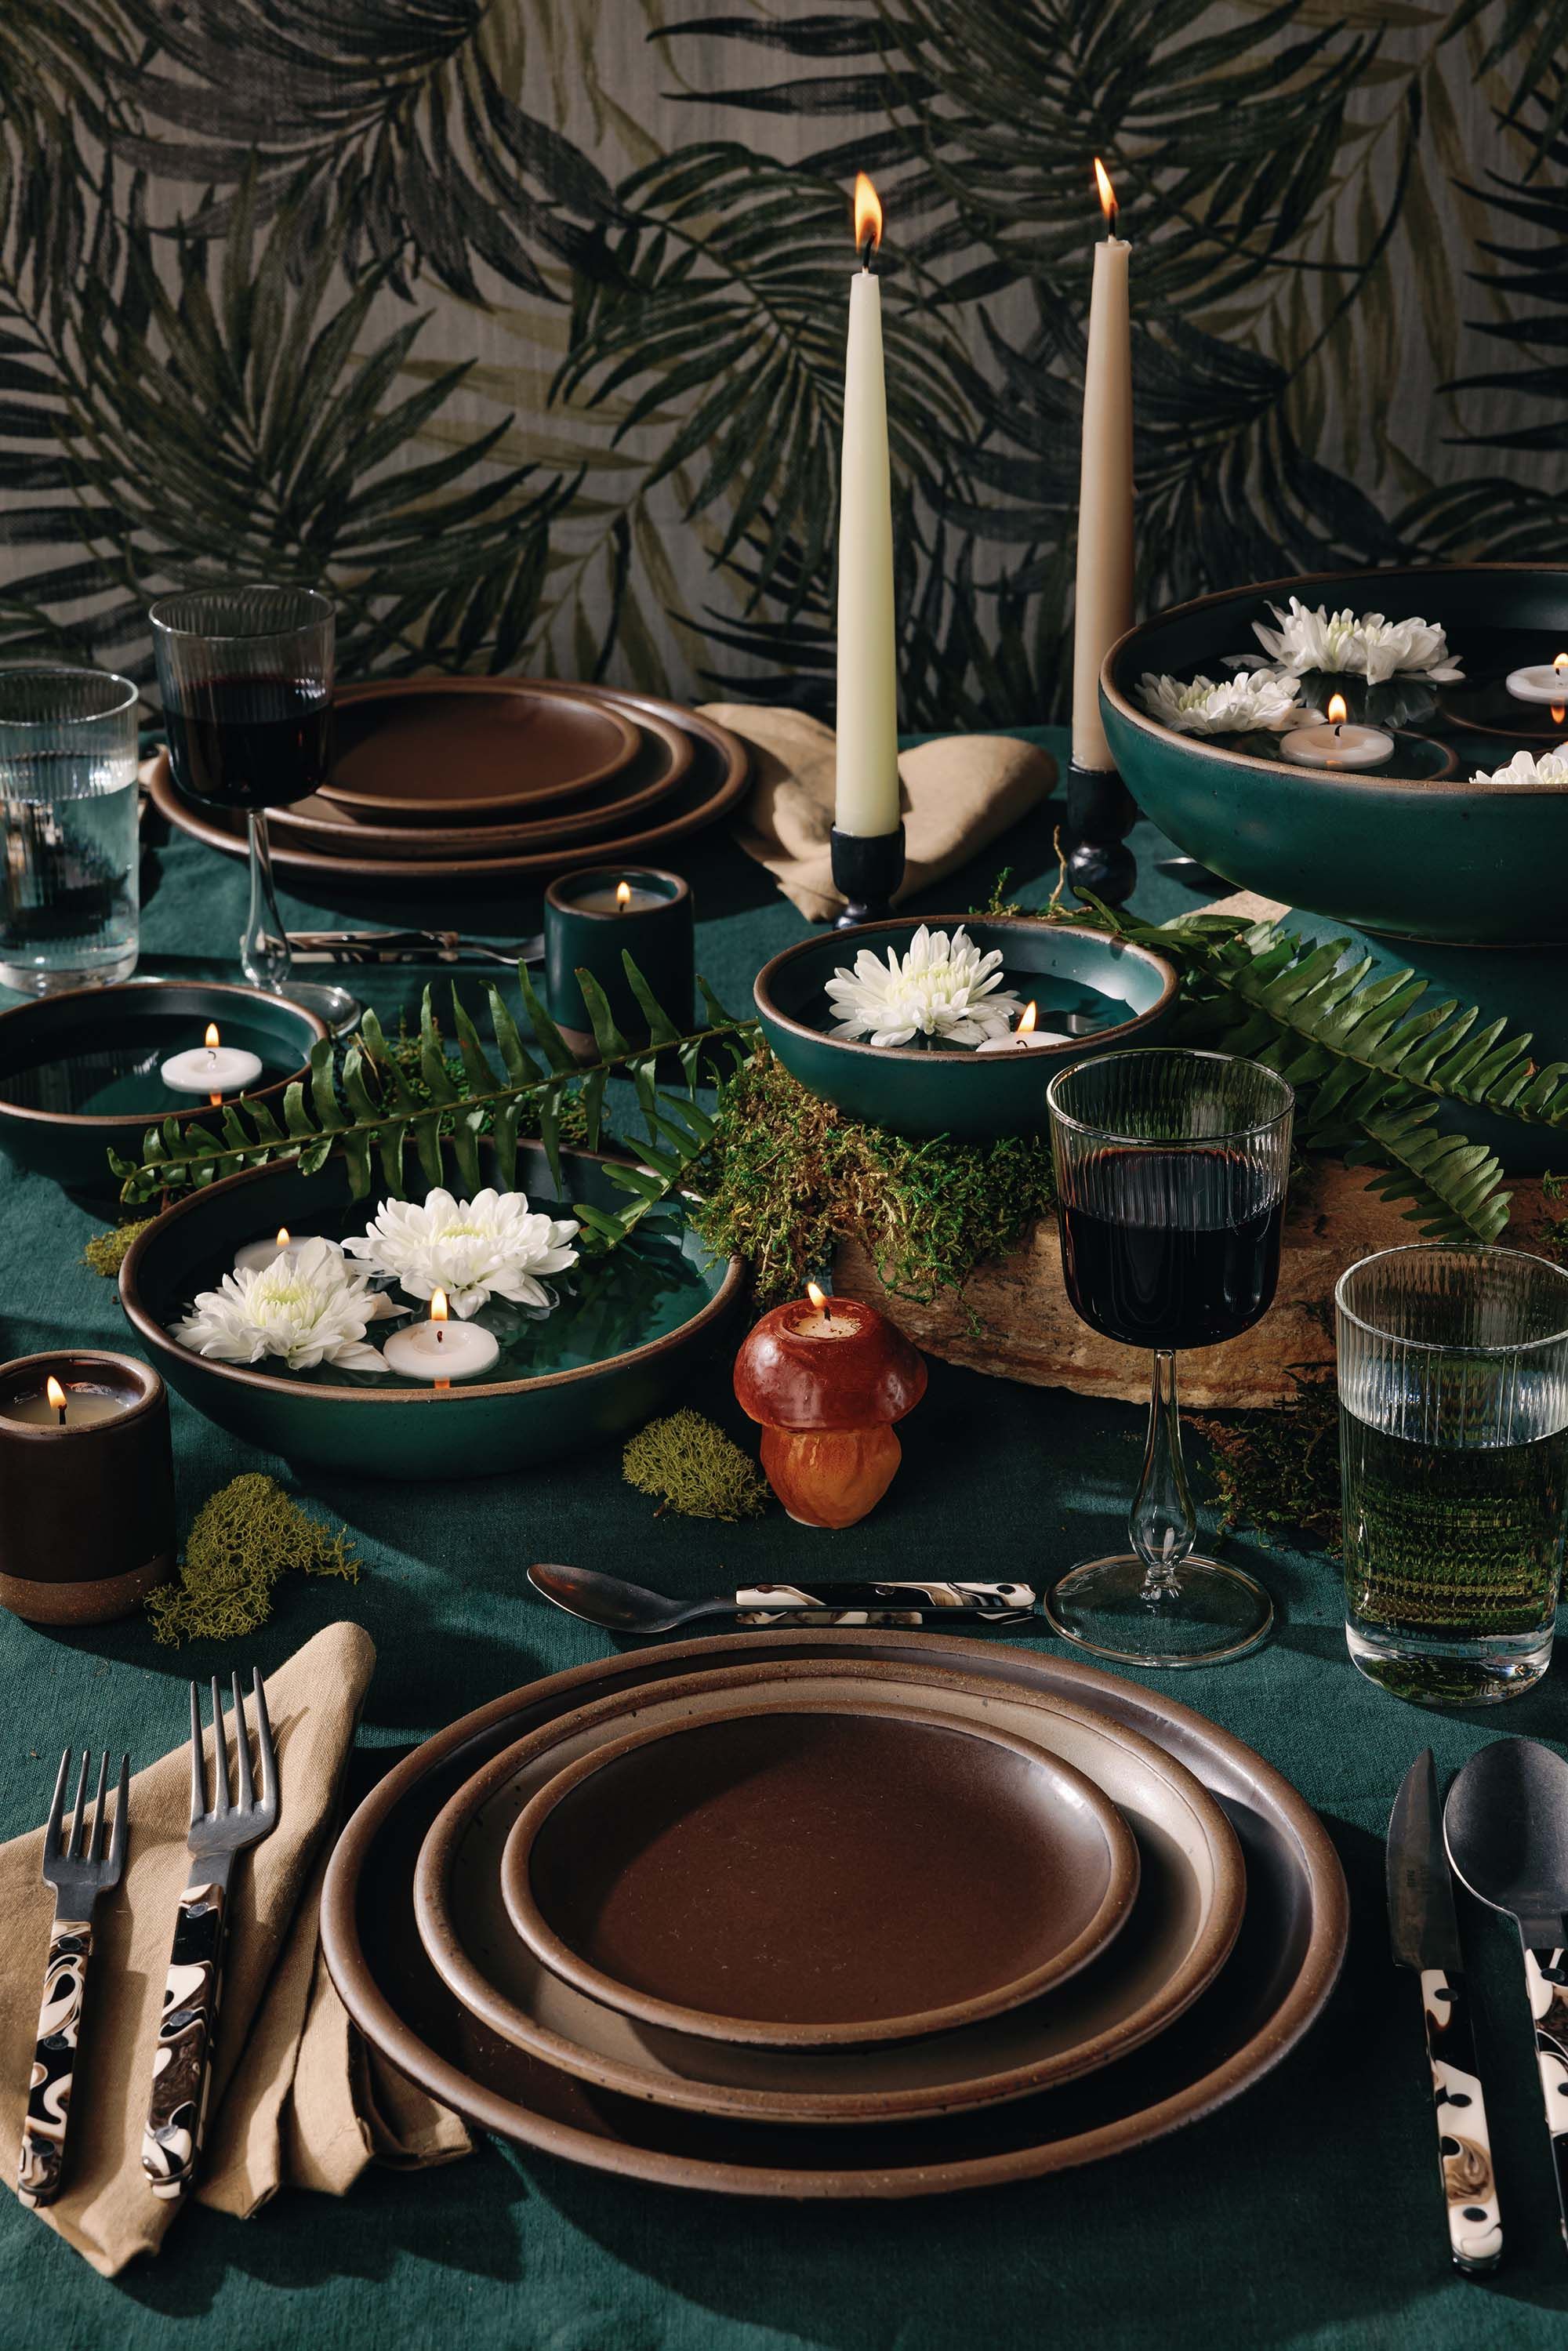 A tablescape scene featuring brown and teal ceramic plates and bowls, lit tapered candles, ferns, white flowers, with sophisticated flatware and table napkins. All on a dark teal tablecloth with a fern wallpaper background